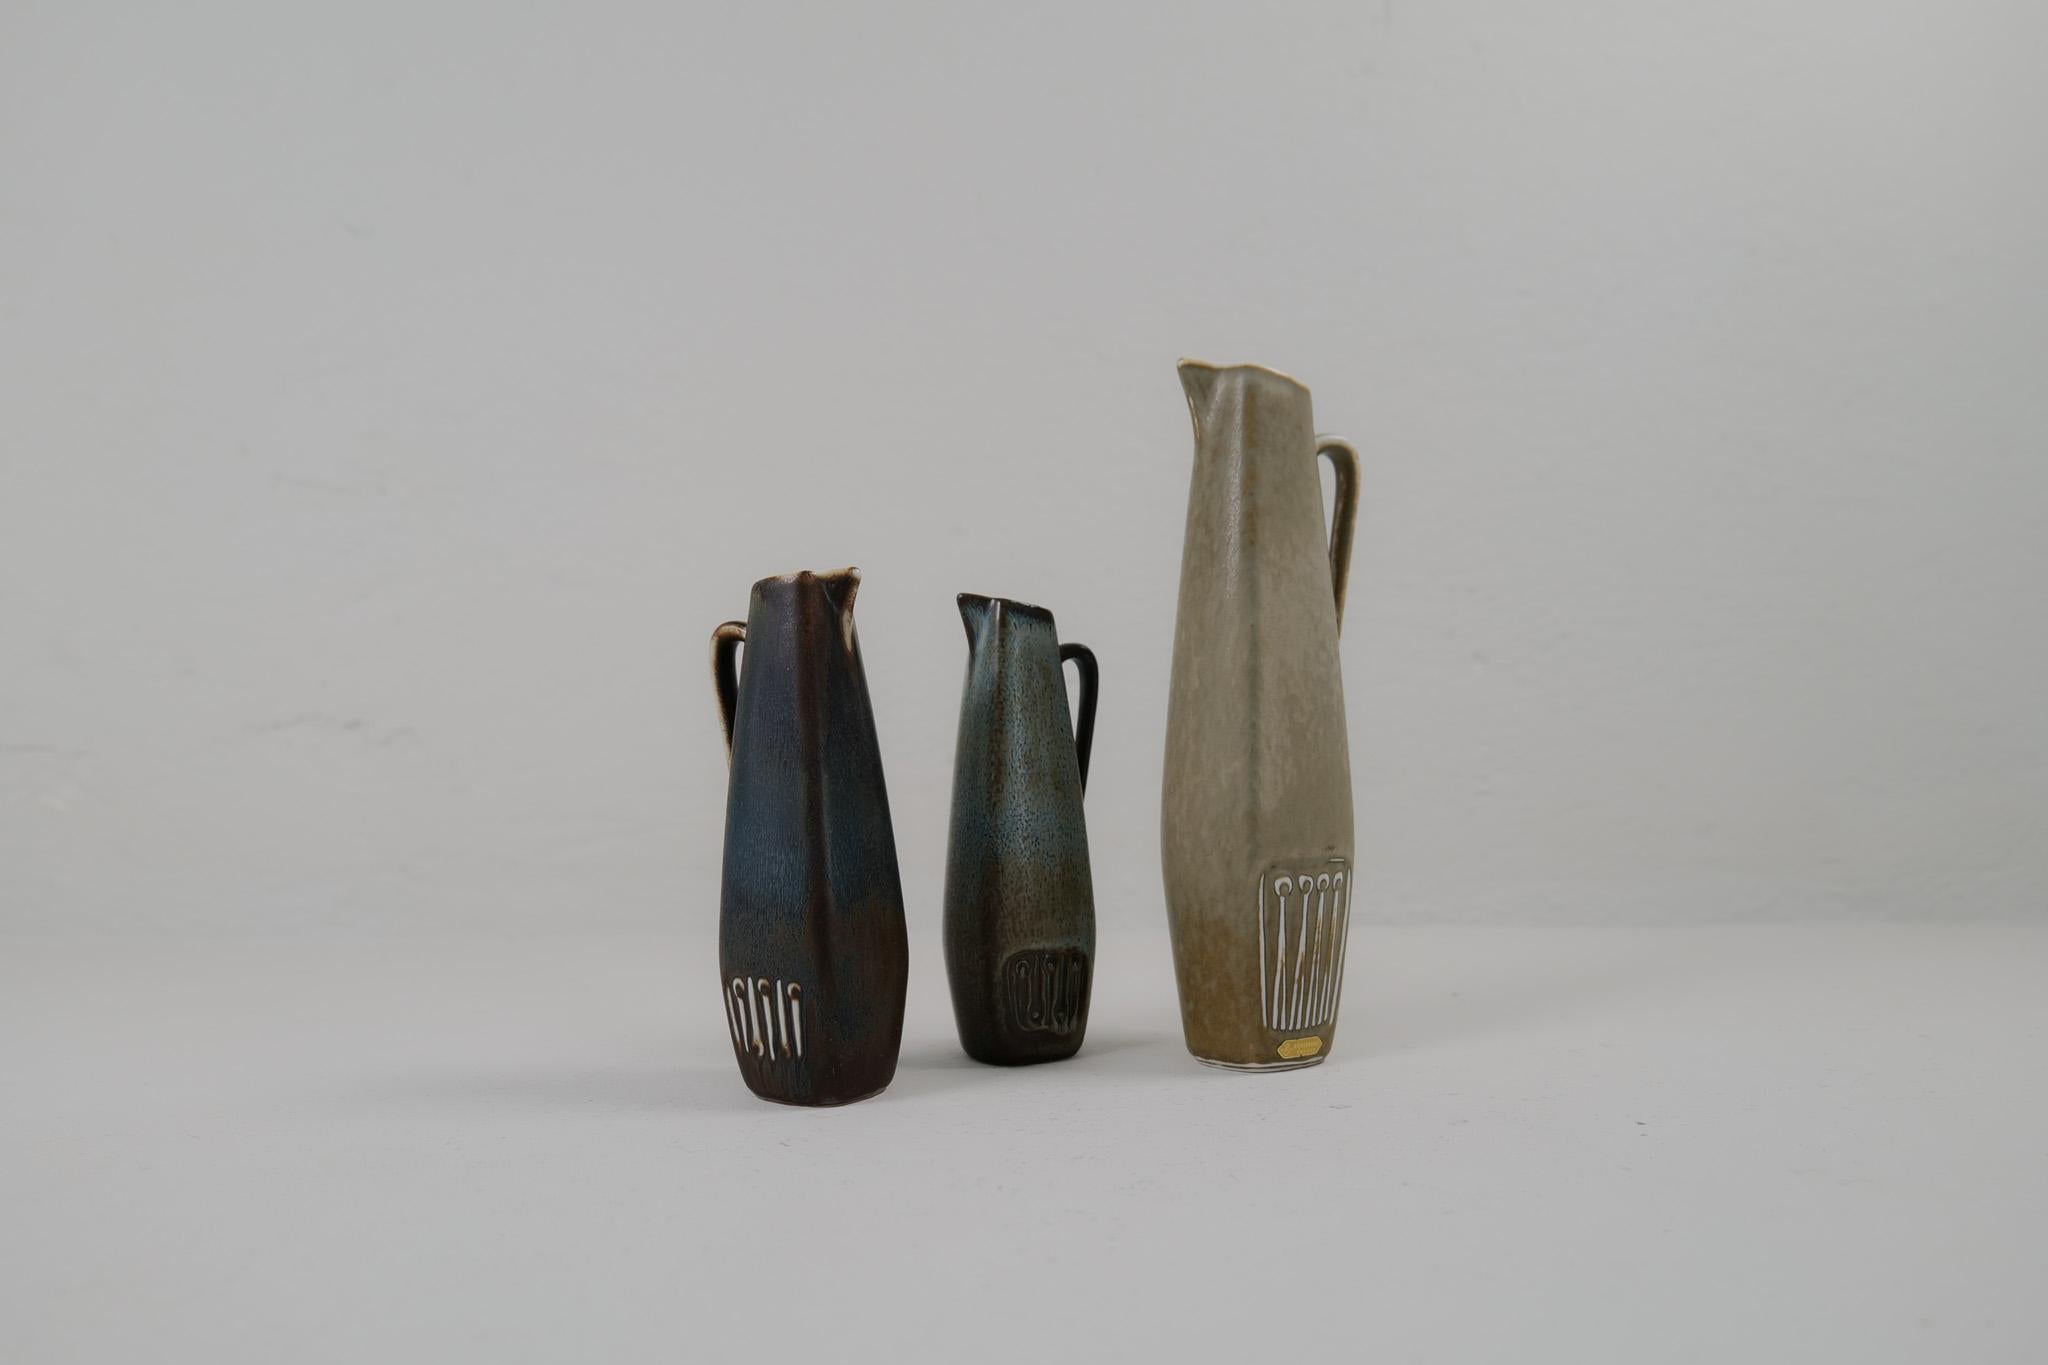 Three wonderful pieces made in Sweden during the 1950s at Rörstrand factory and designed by Gunnar Nylund

The vases have nice antique look in a modern shape. The vases are nicely sculptured and have a nice glaze.

Good condition. 

Measures: Vases